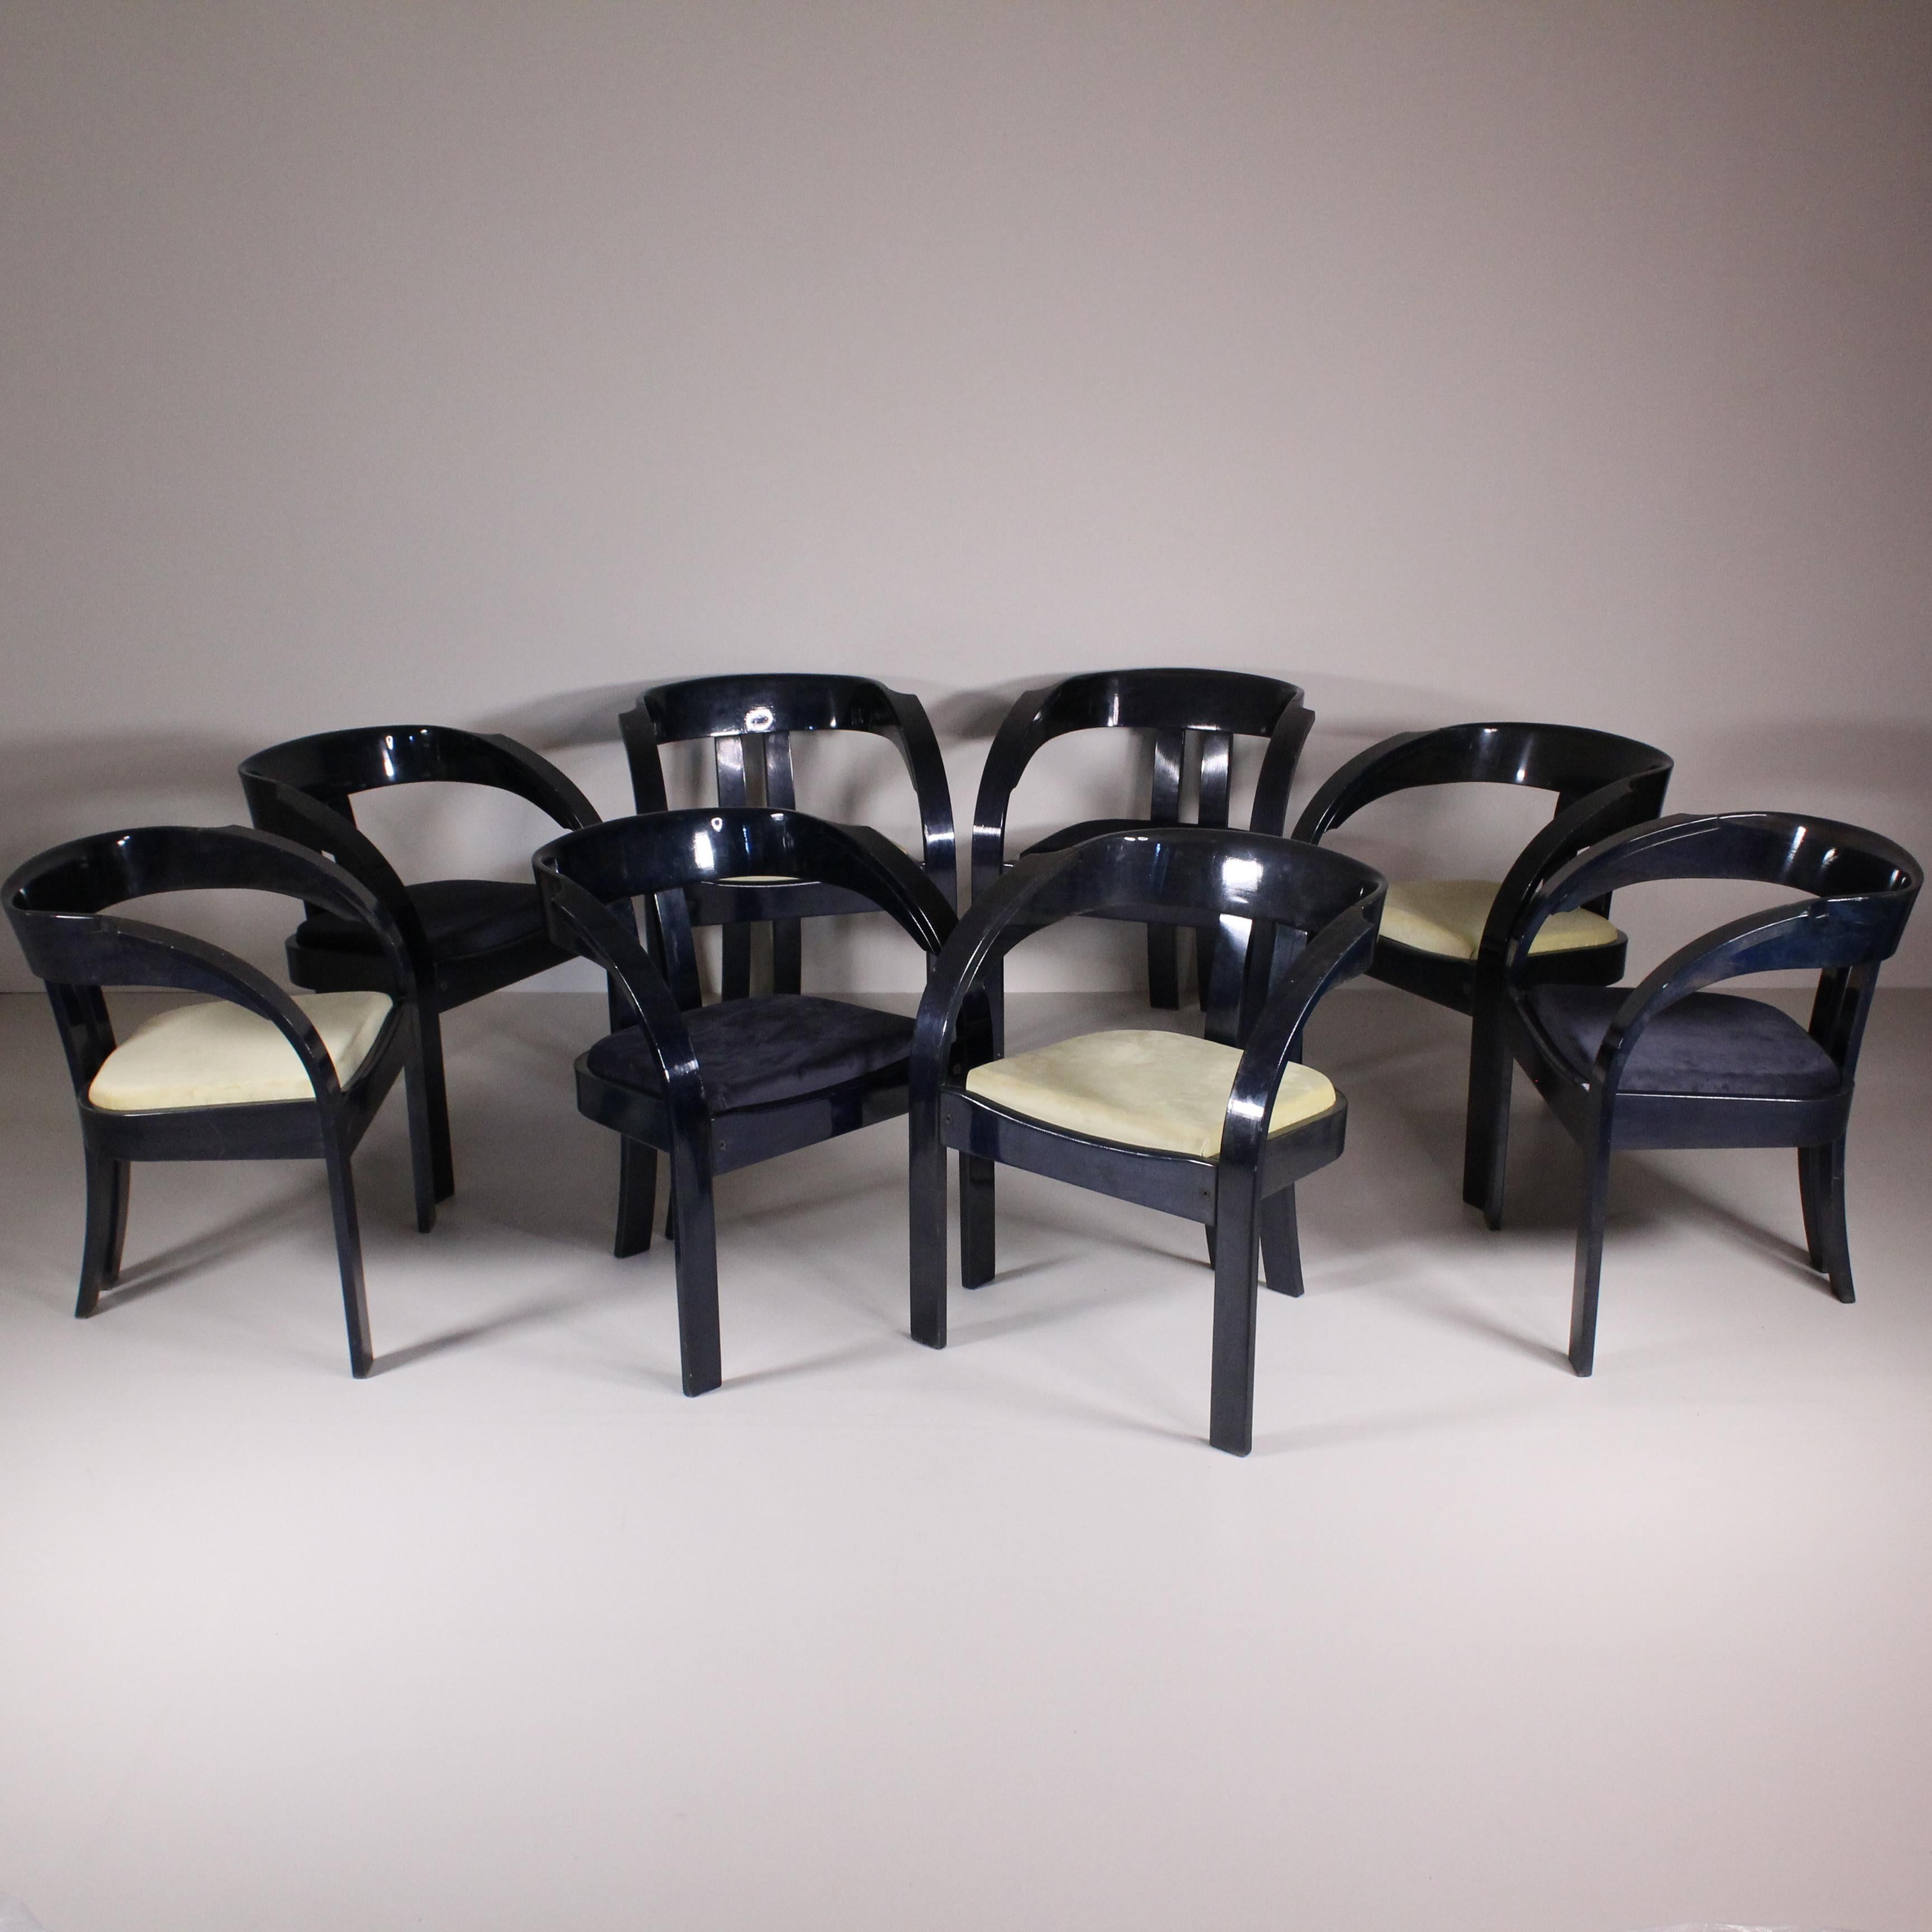 This Set of 8 Elisa Chairs, designed by Giovanni Bassi for Poltronova circa 1970, stands as an exemplary testament to the innovative spirit and aesthetic brilliance of 20th-century Italian design. Giovanni Bassi, a prominent figure in the design